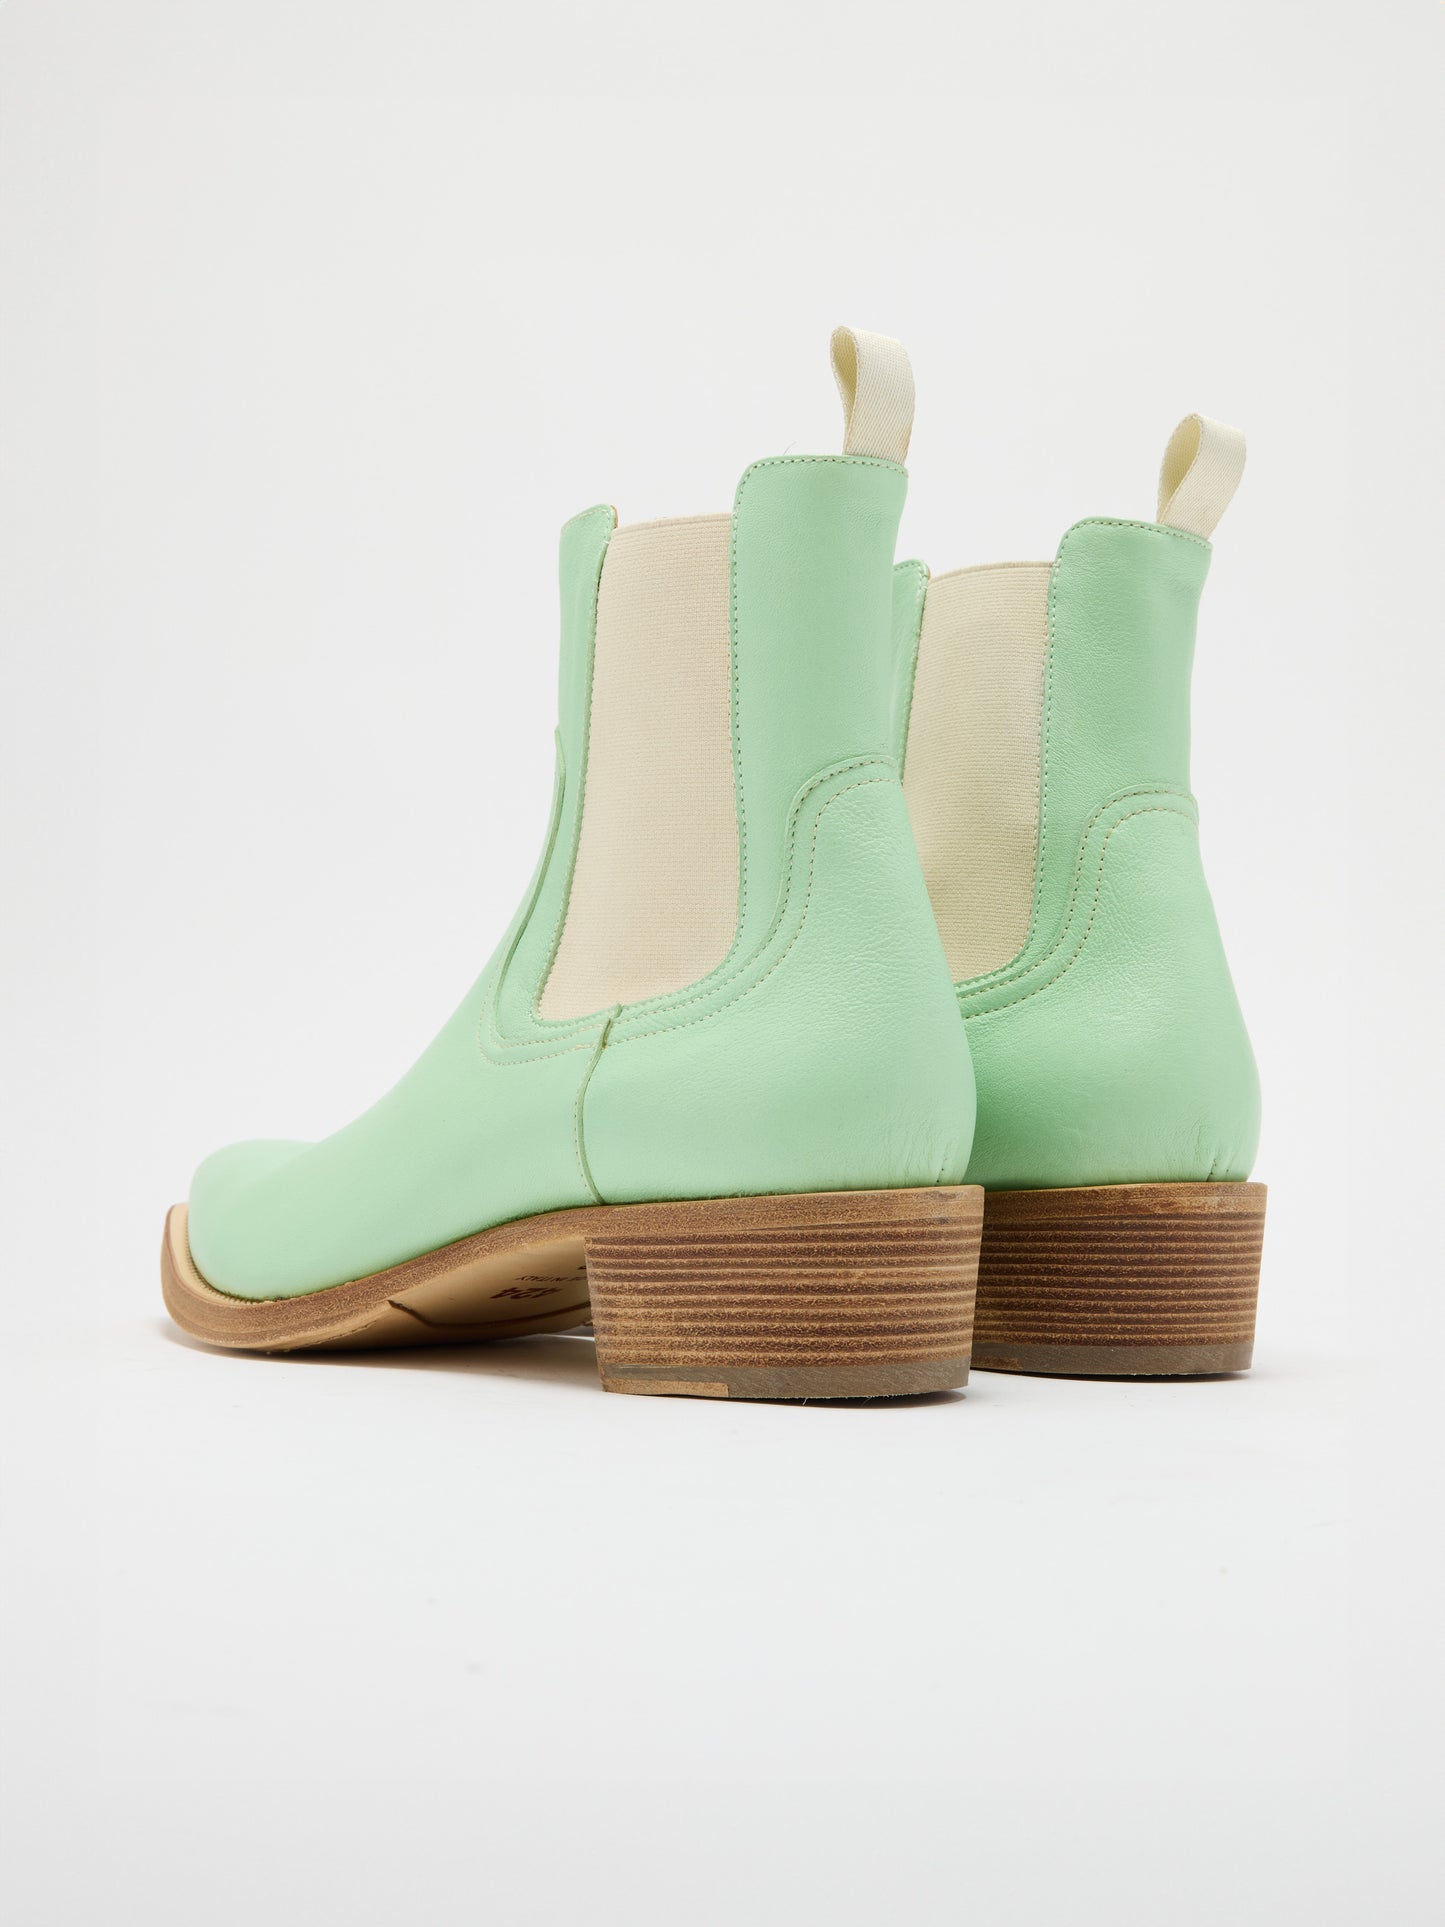 Cowboy Boots in Mint